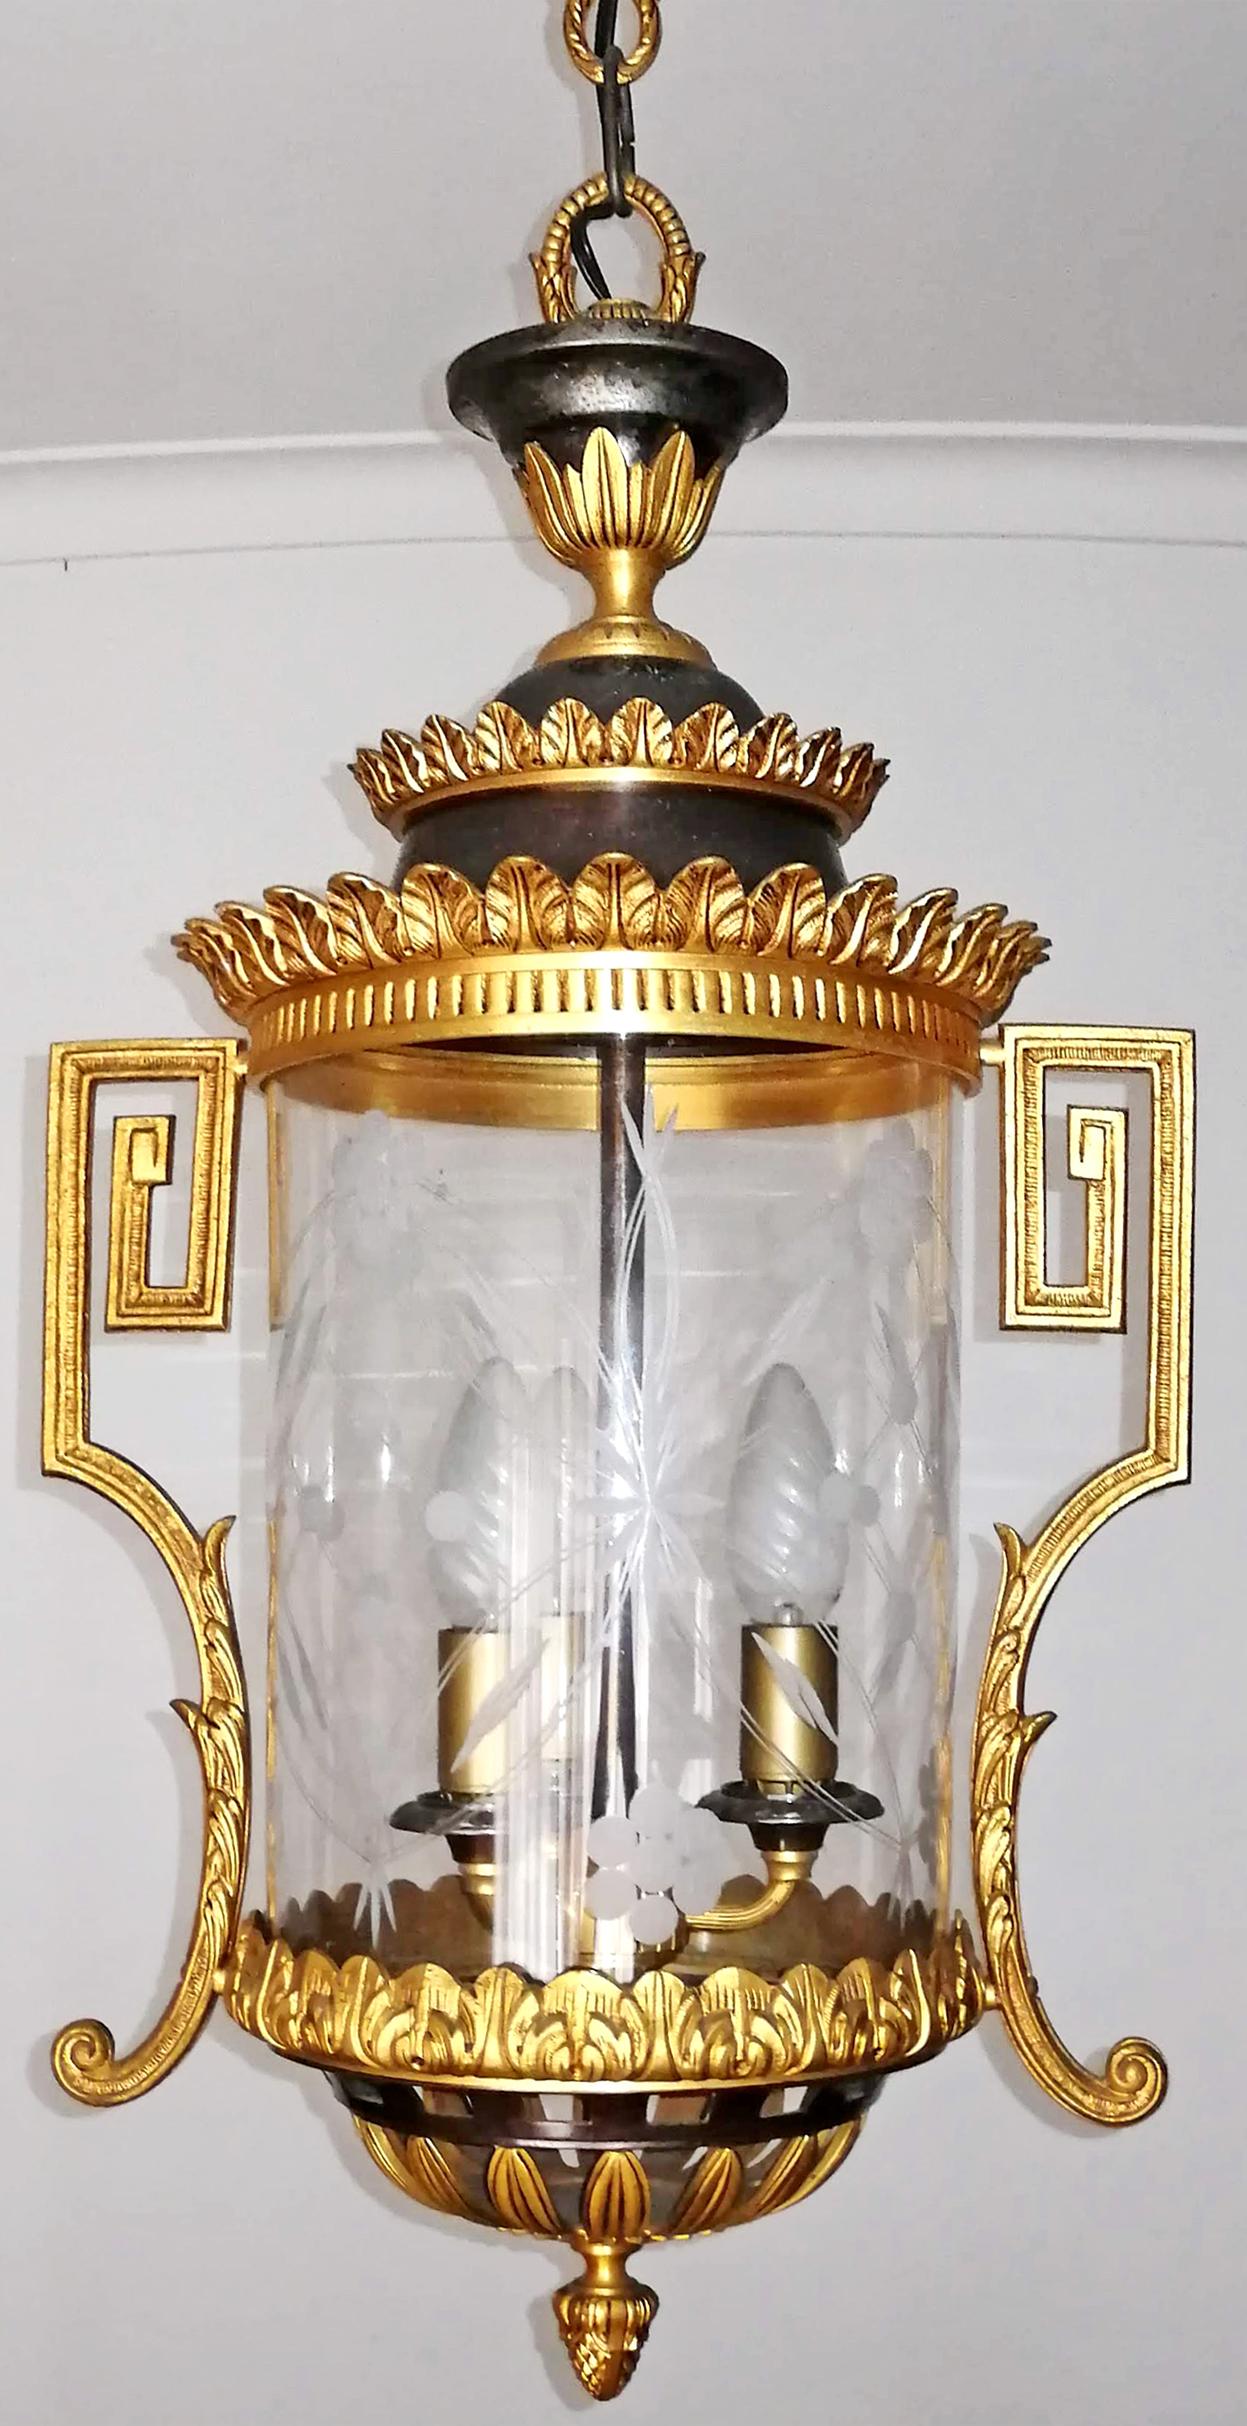 Cast French Empire Patinated and Gilt Bronze Cut Glass 3-Light Lantern Chandelier